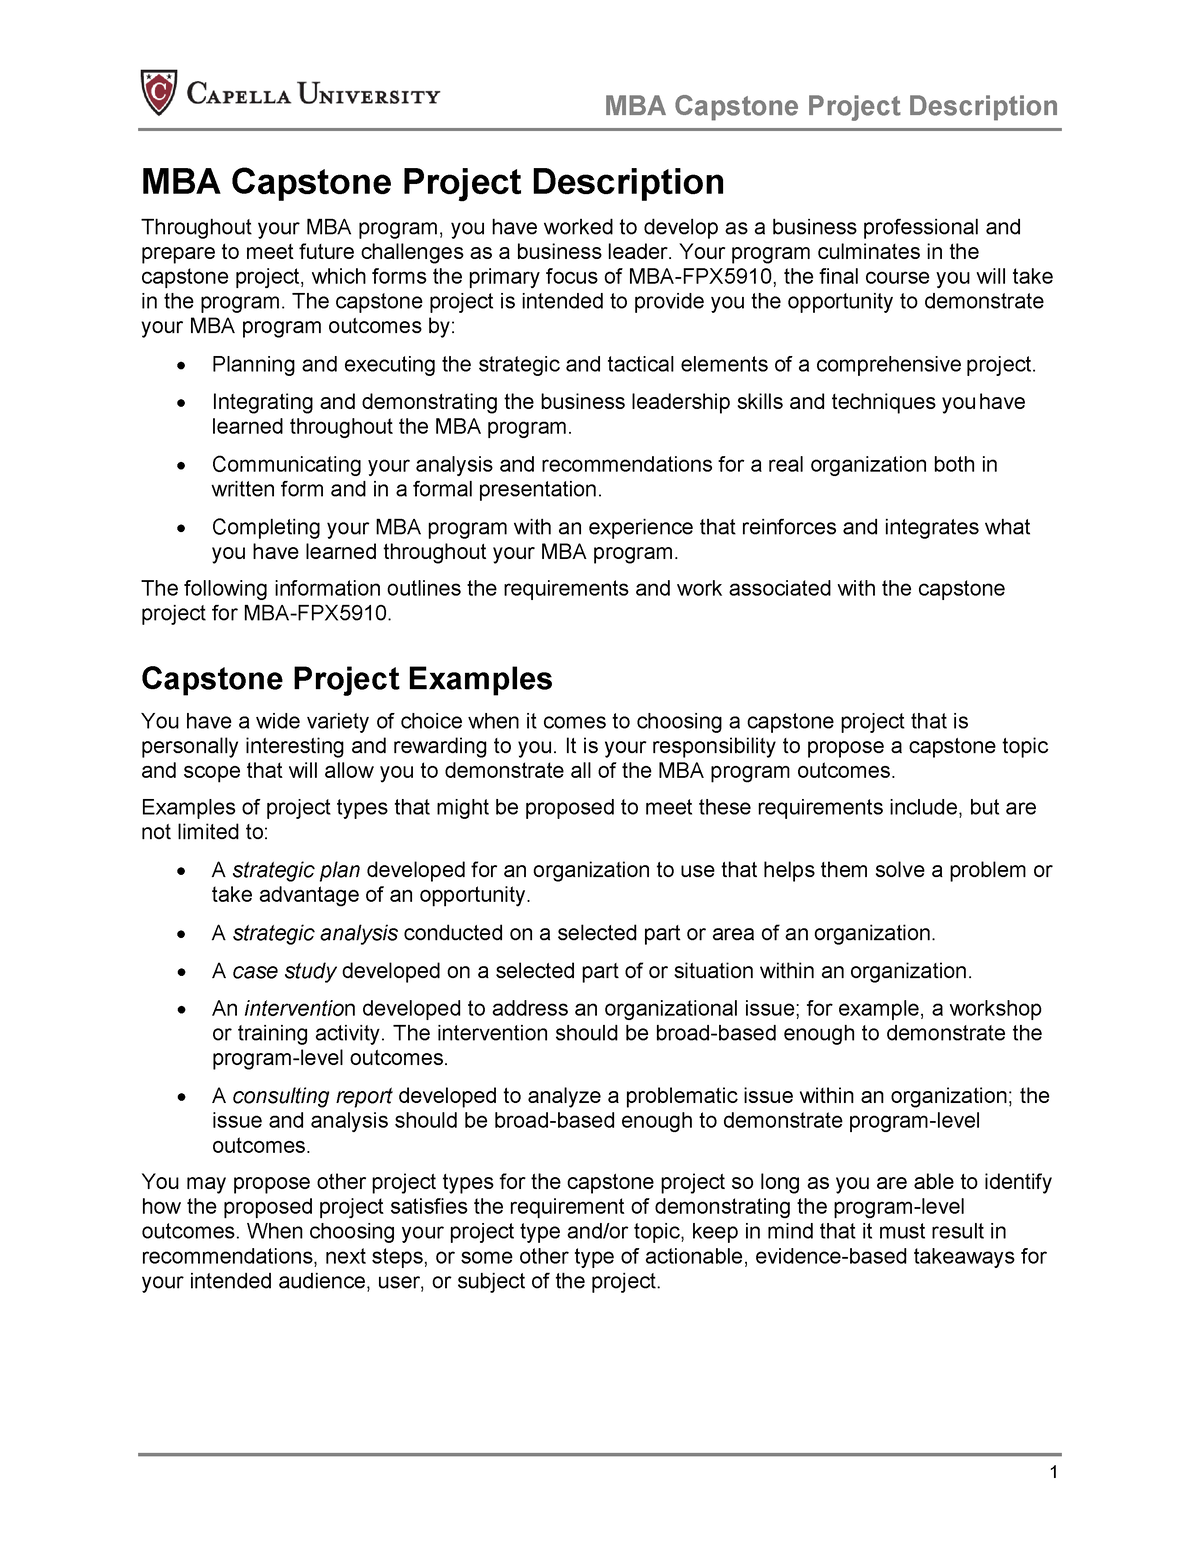 example of a capstone project proposal